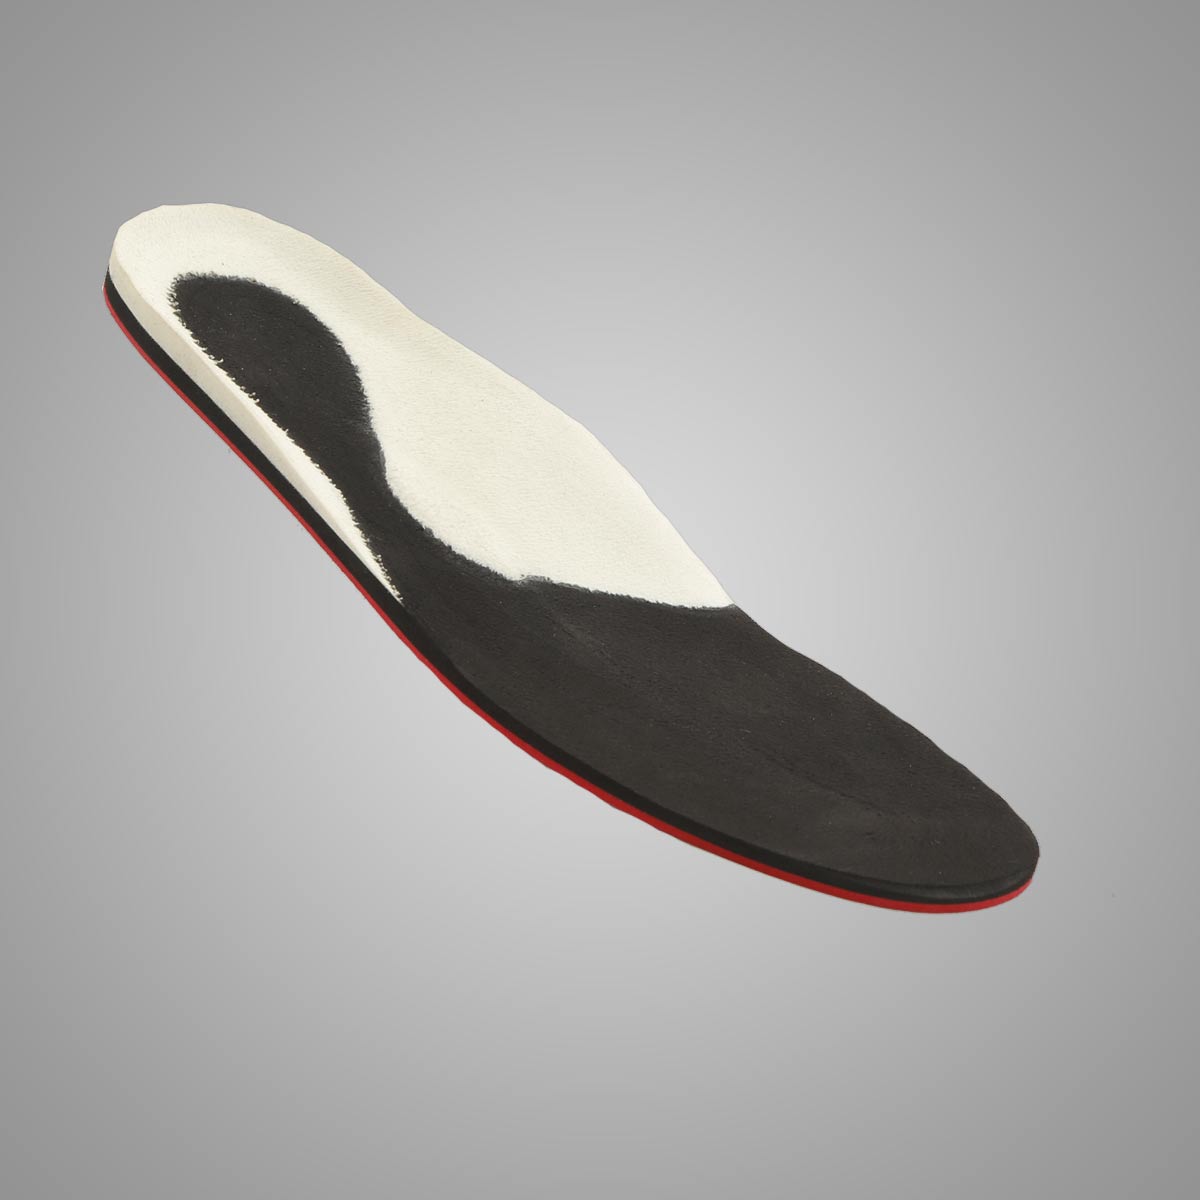 German 3 layer sports insoles